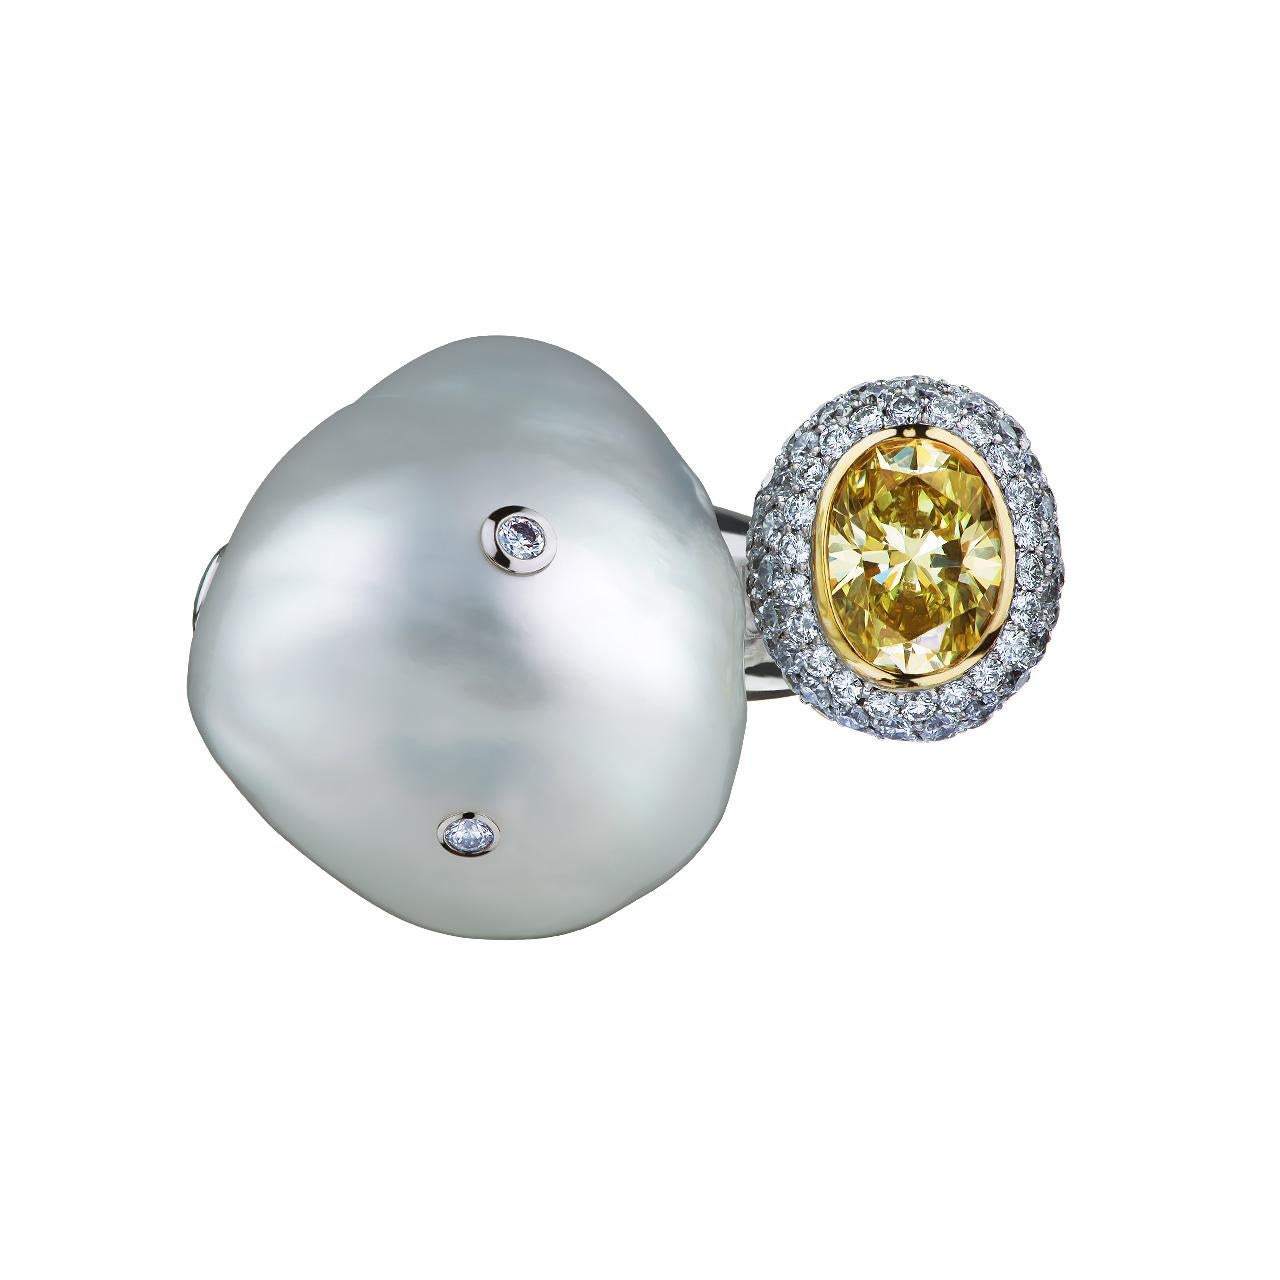 - 1 Oval Fancy Yellow Diamond – 1.03 ct, FY/VS1
- 263 Round Diamonds – 1.80 ct, F-G/VVS2-VS1
- 20.40 mm White South Sea Baroque pearl
- 18K White Gold 
- Weight: 17.24 g
- Size: 17.1 mm
This fabulous ring from the Bionics collection of Jewelry